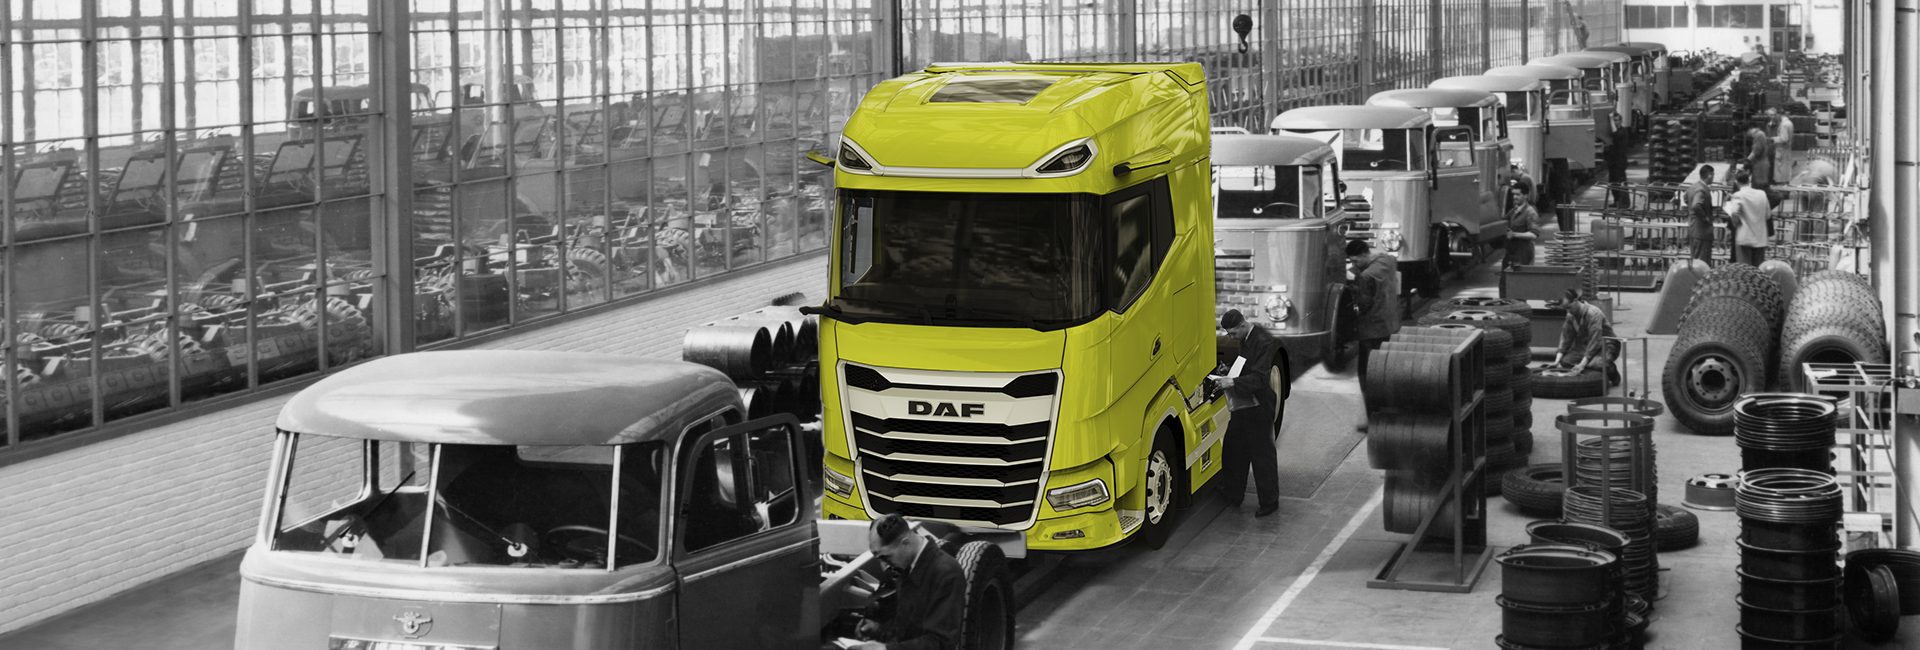 DAF new truck in 1952 factory